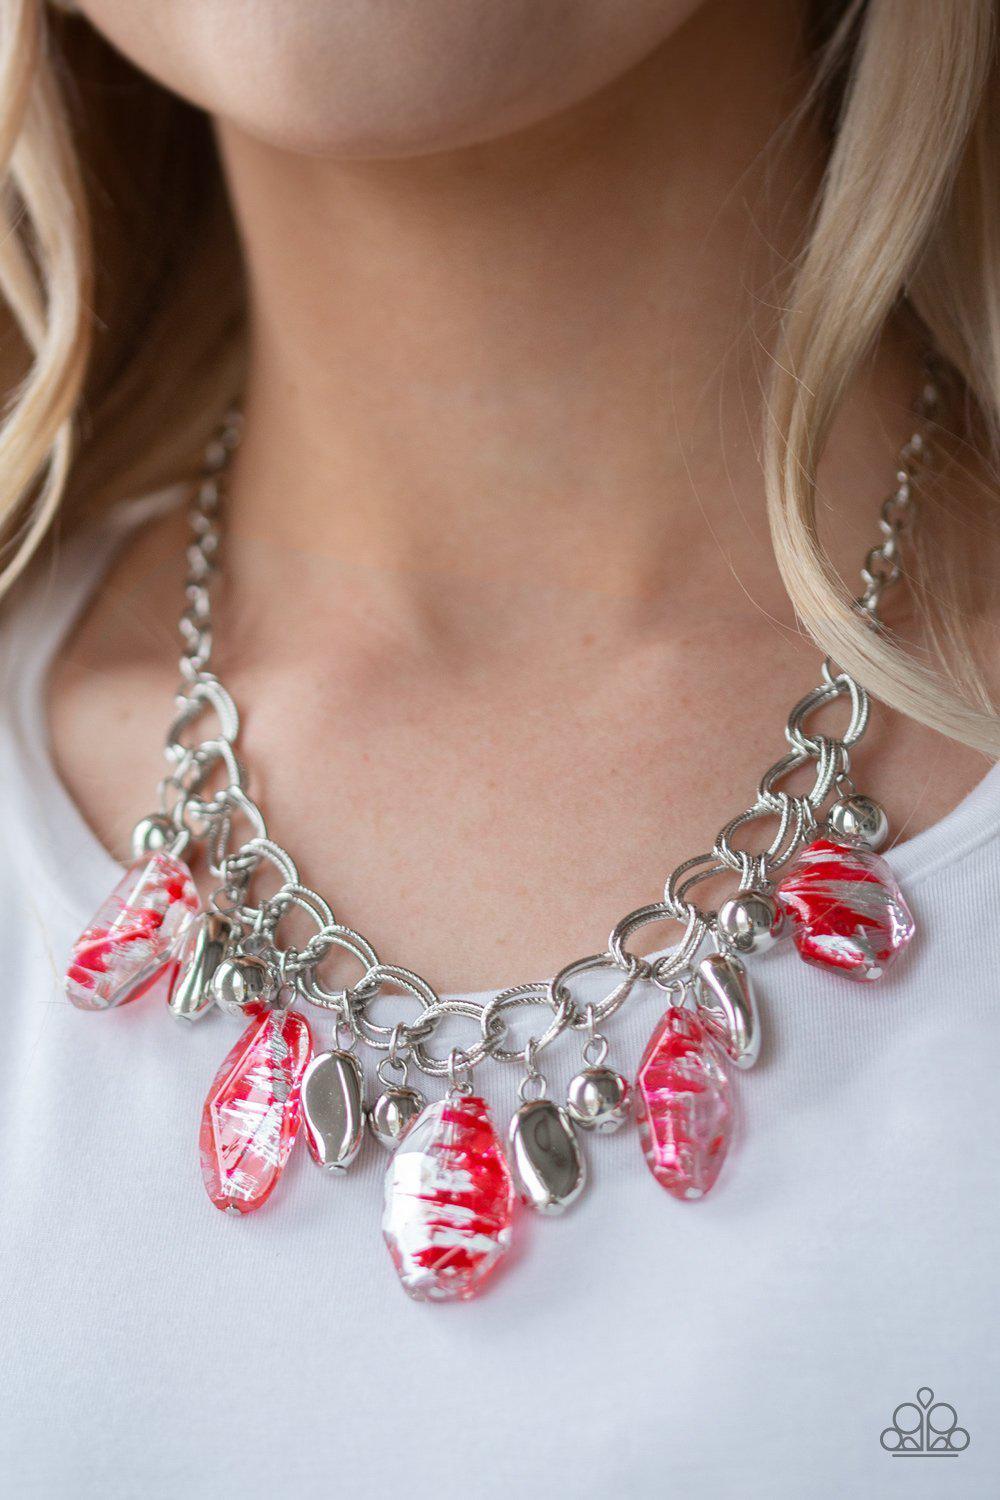 Chroma Drama Red and Silver Necklace - Paparazzi Accessories - model -CarasShop.com - $5 Jewelry by Cara Jewels